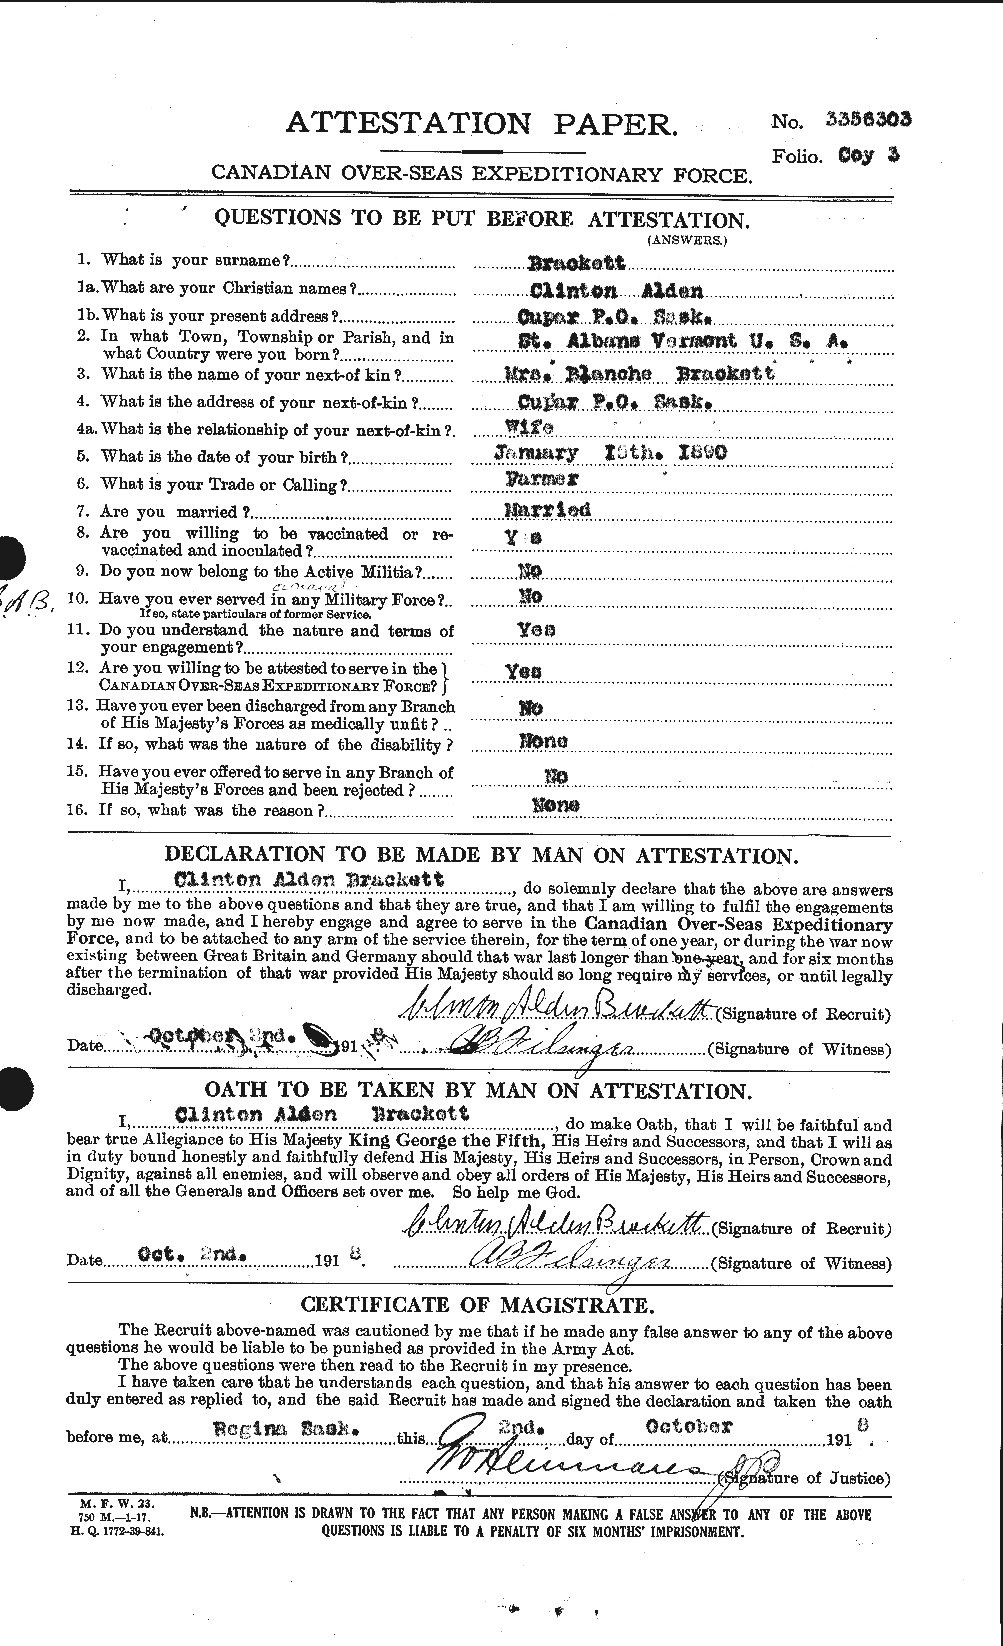 Personnel Records of the First World War - CEF 254731a